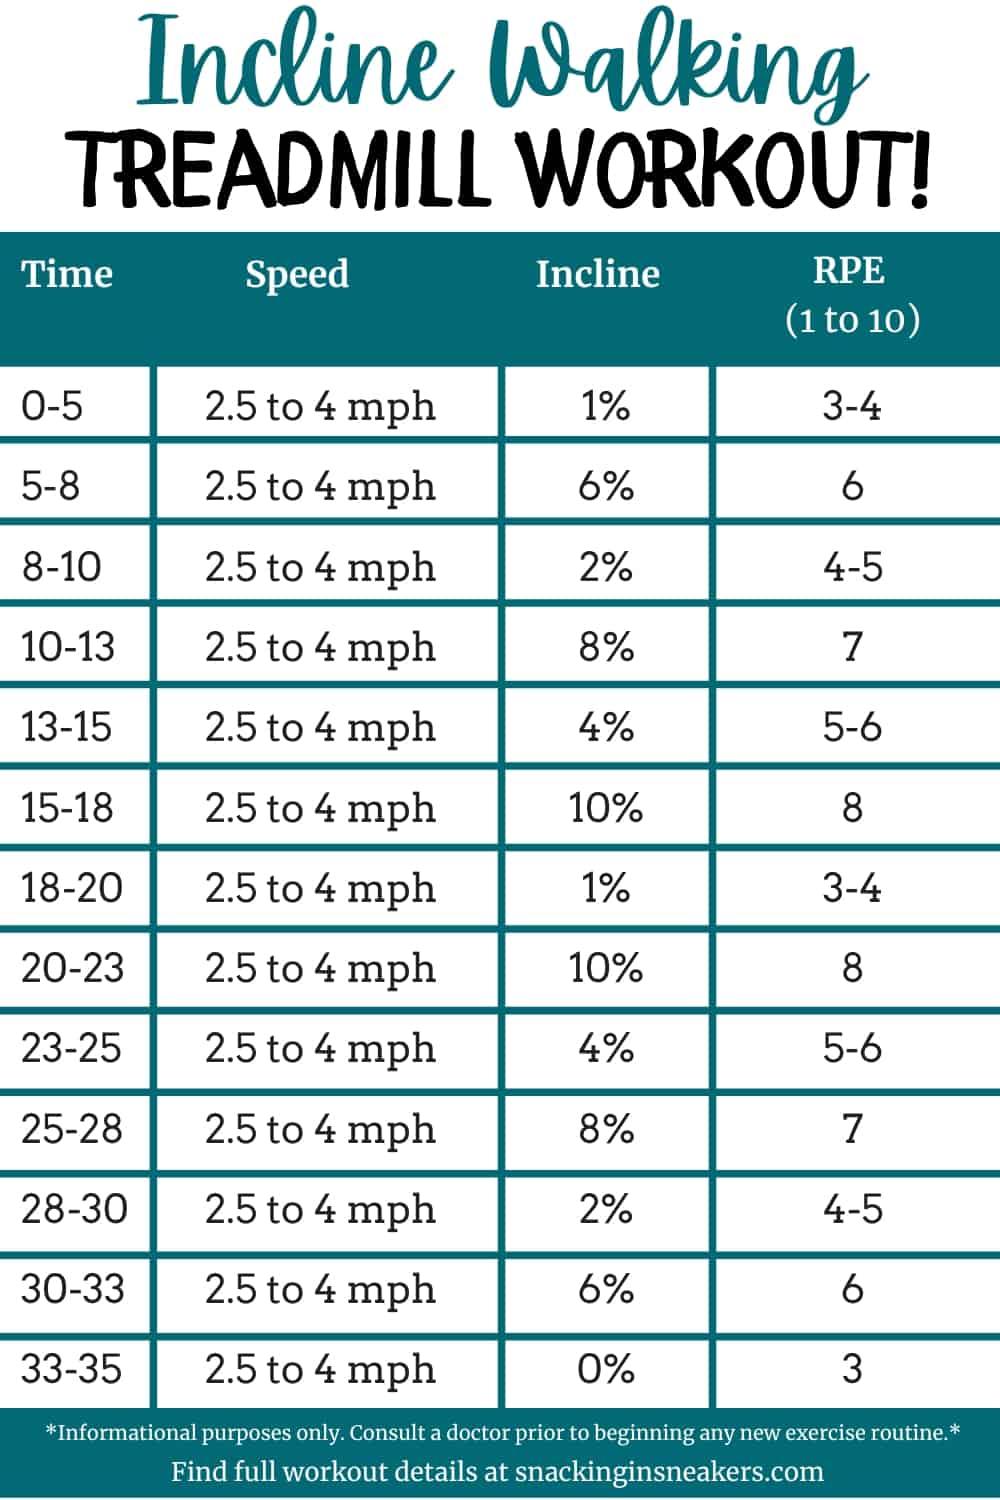 An incline treadmill workout in chart form with the speed, incline, and RPE.